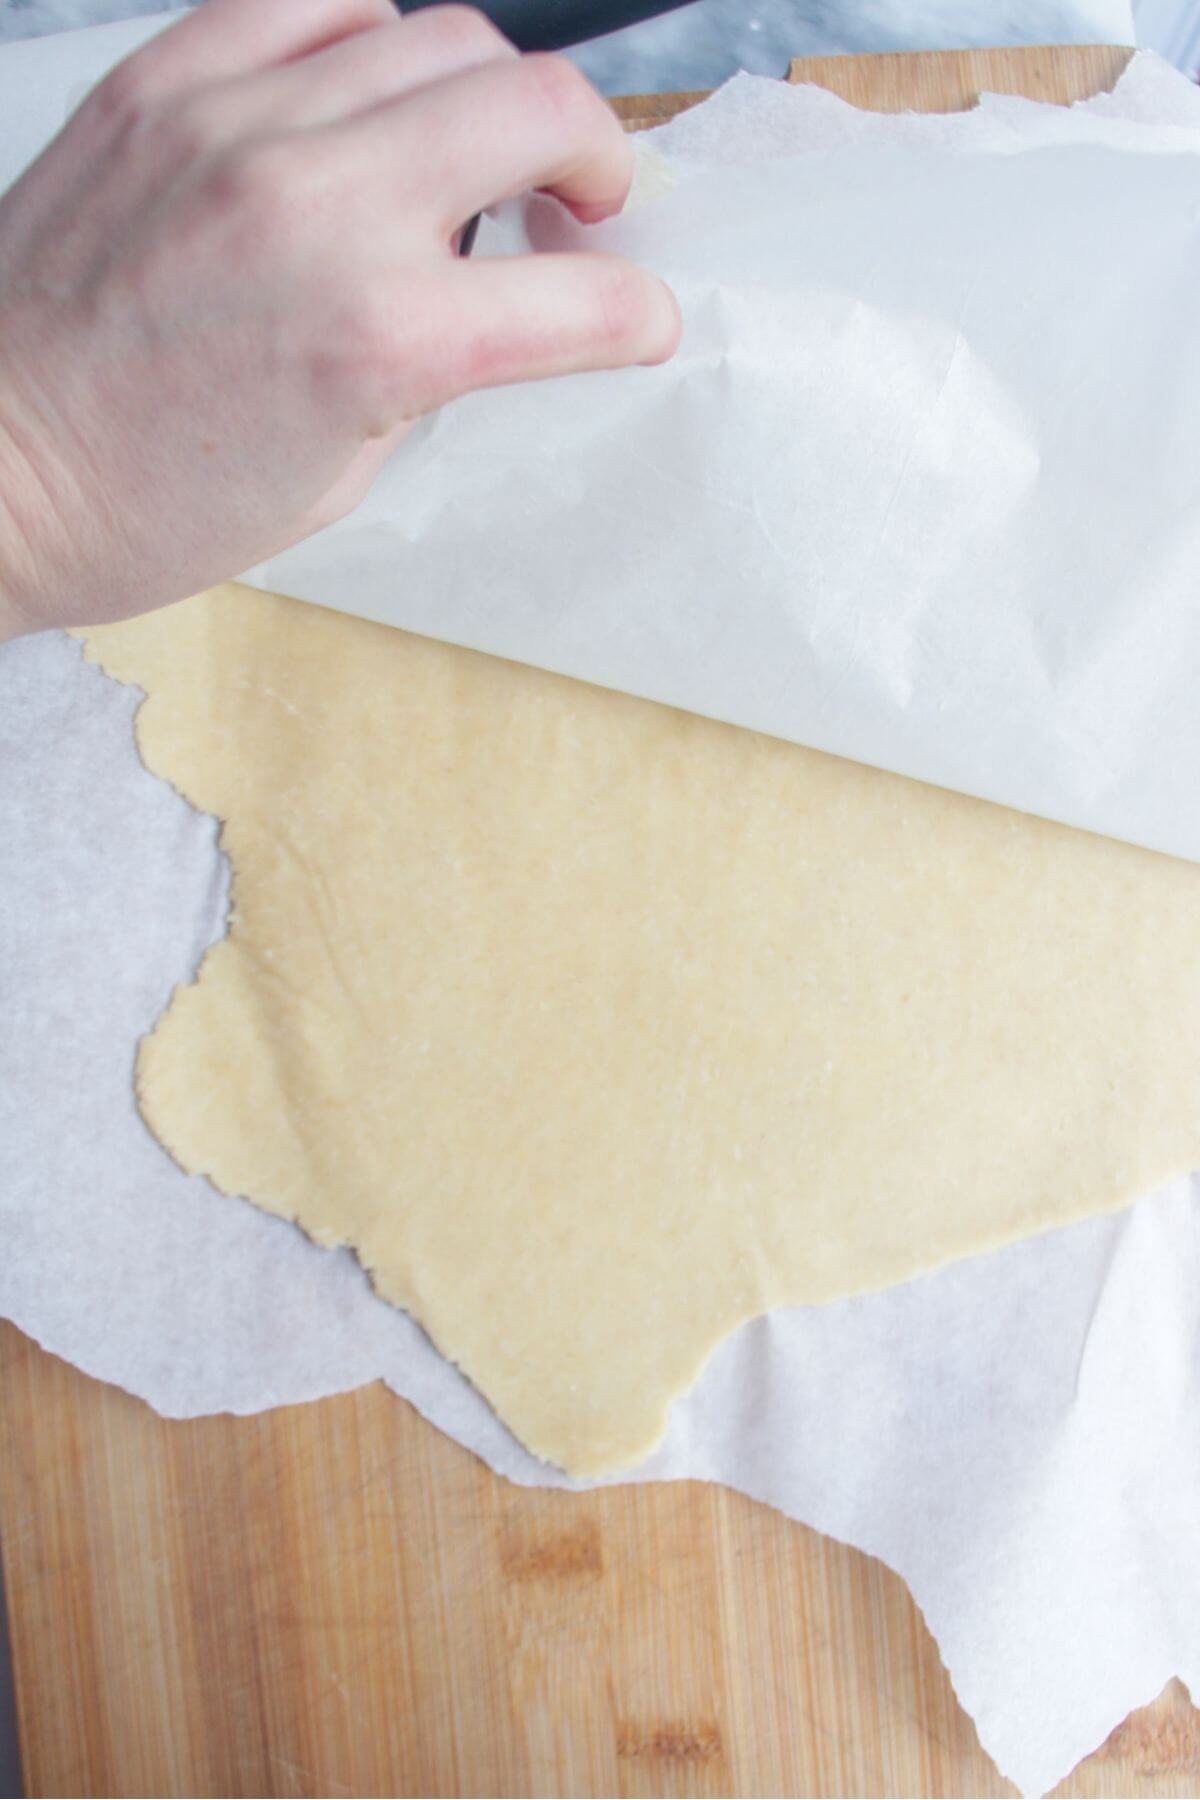 Hand peeling back baking paper to reveal rolled out pastry underneath.